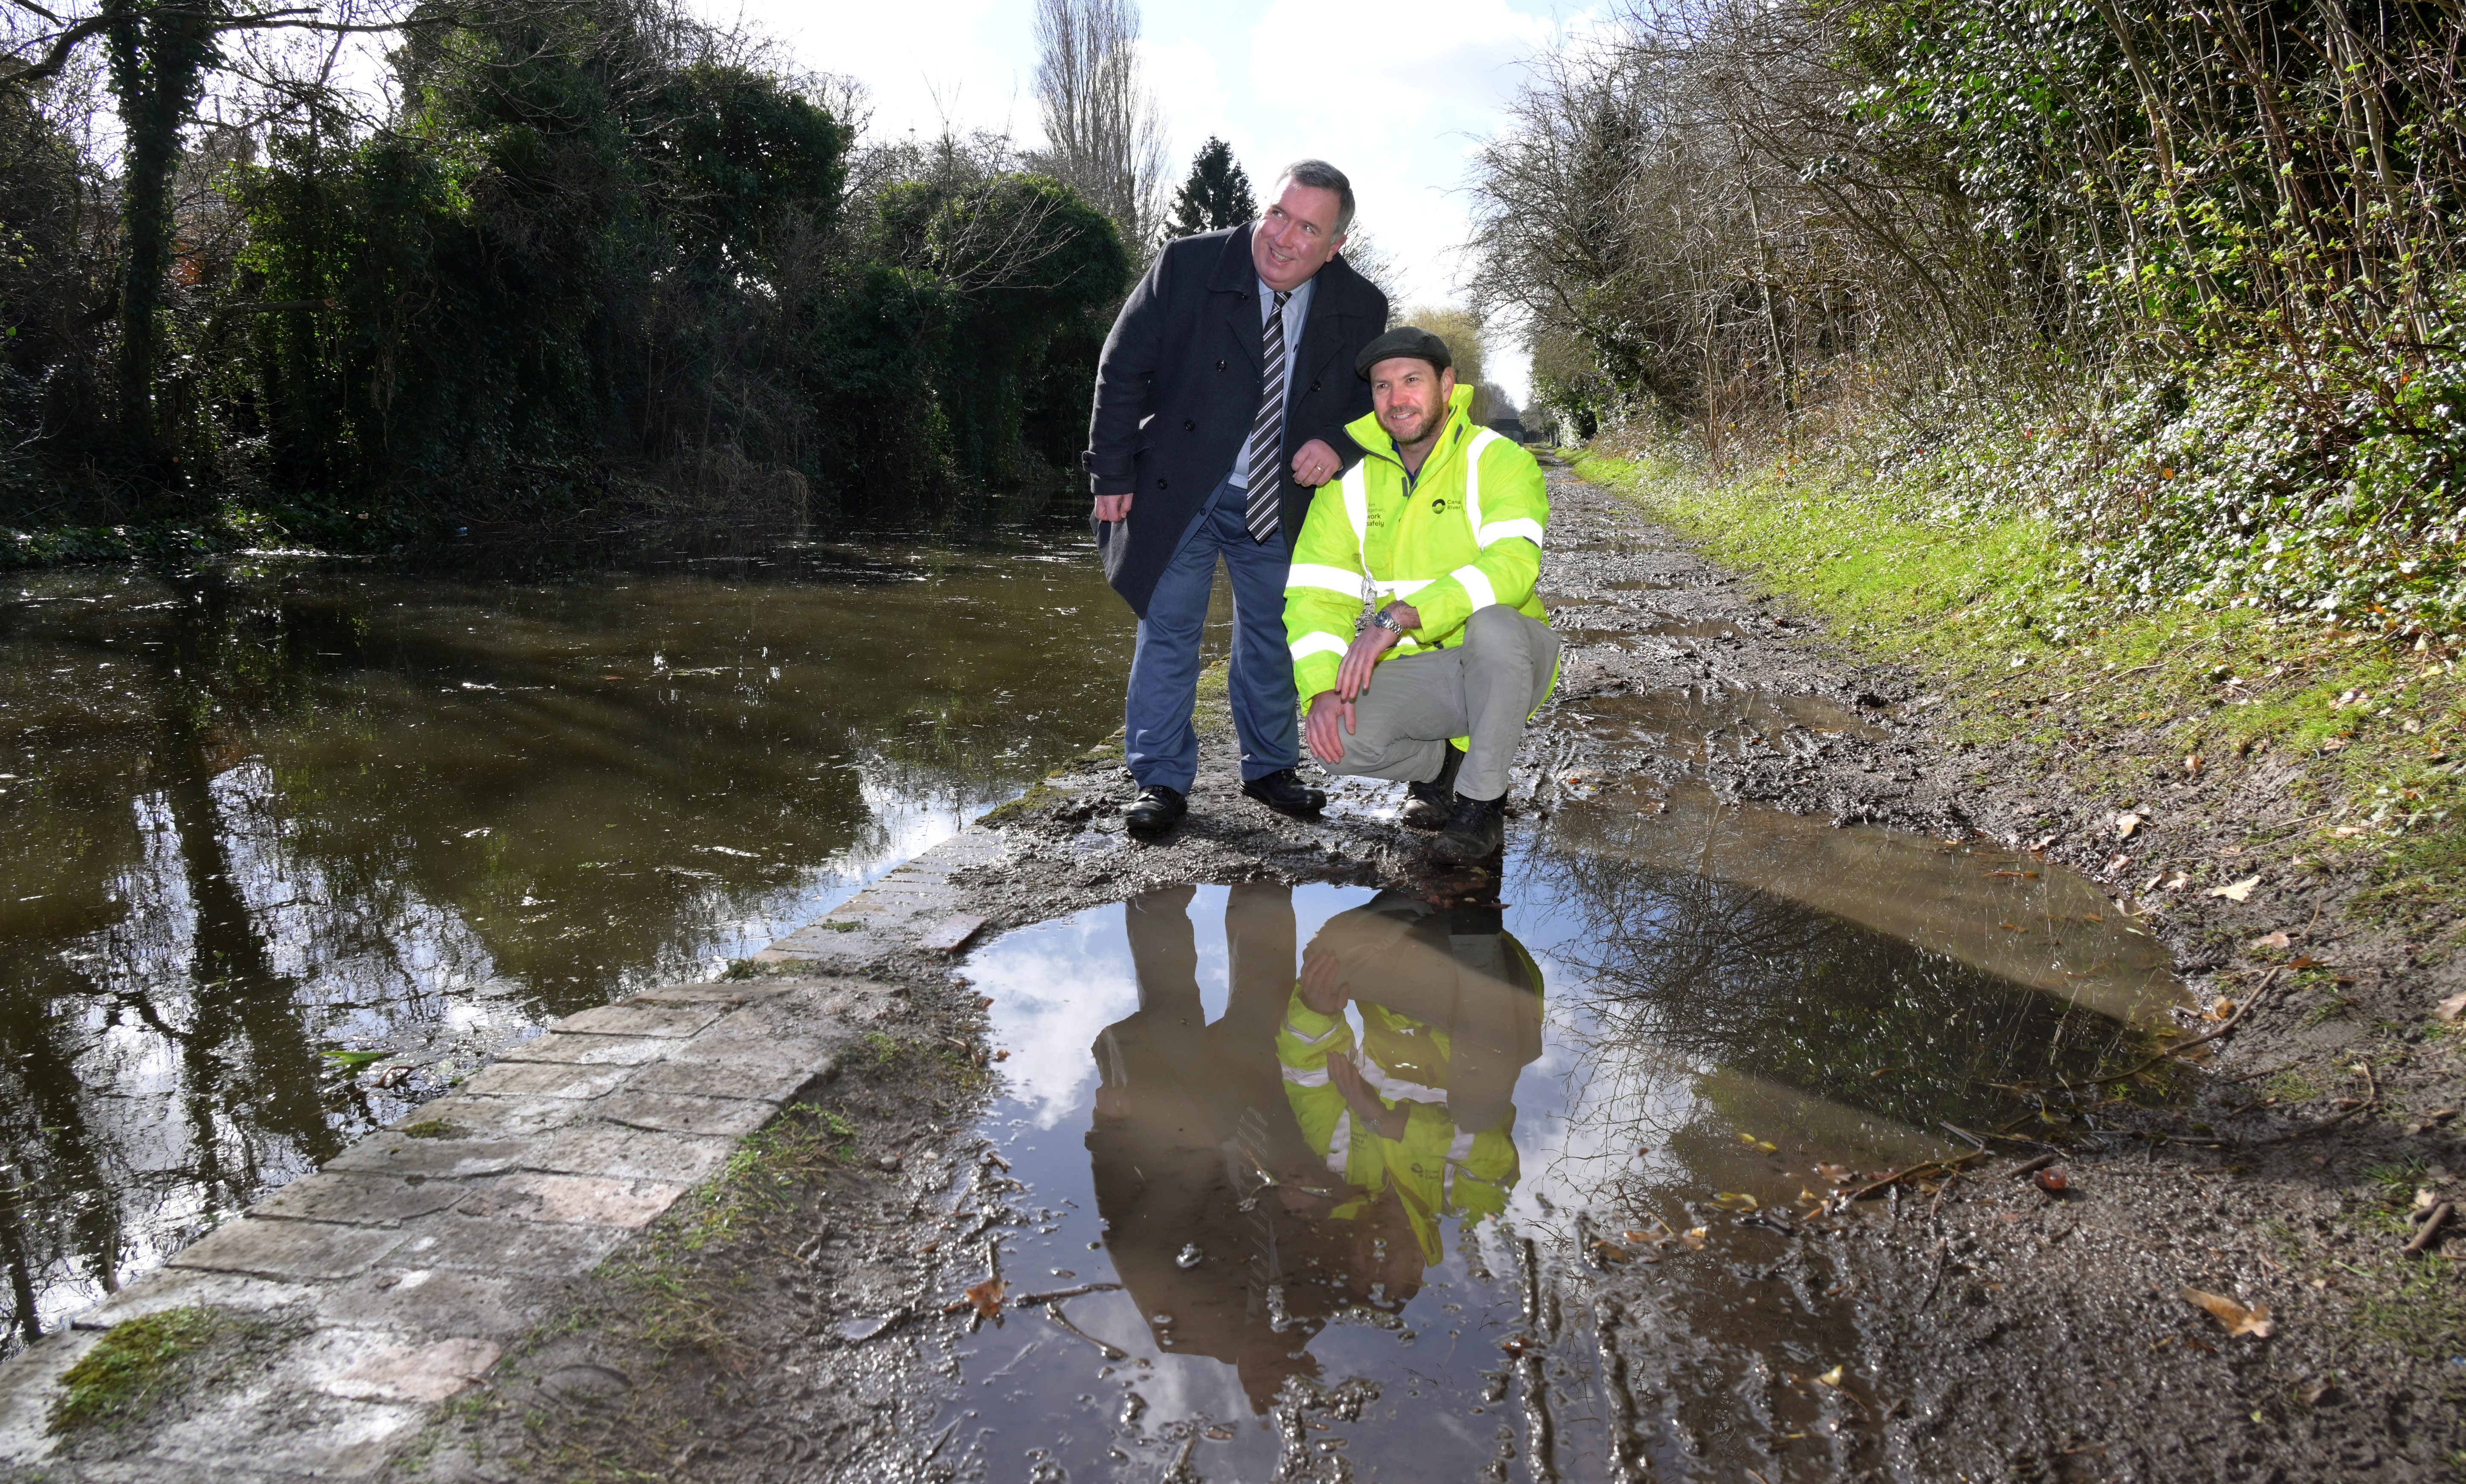 Cllr Andrew and James Dennison from Canal and River Trust looking at the old, worn canal towpath